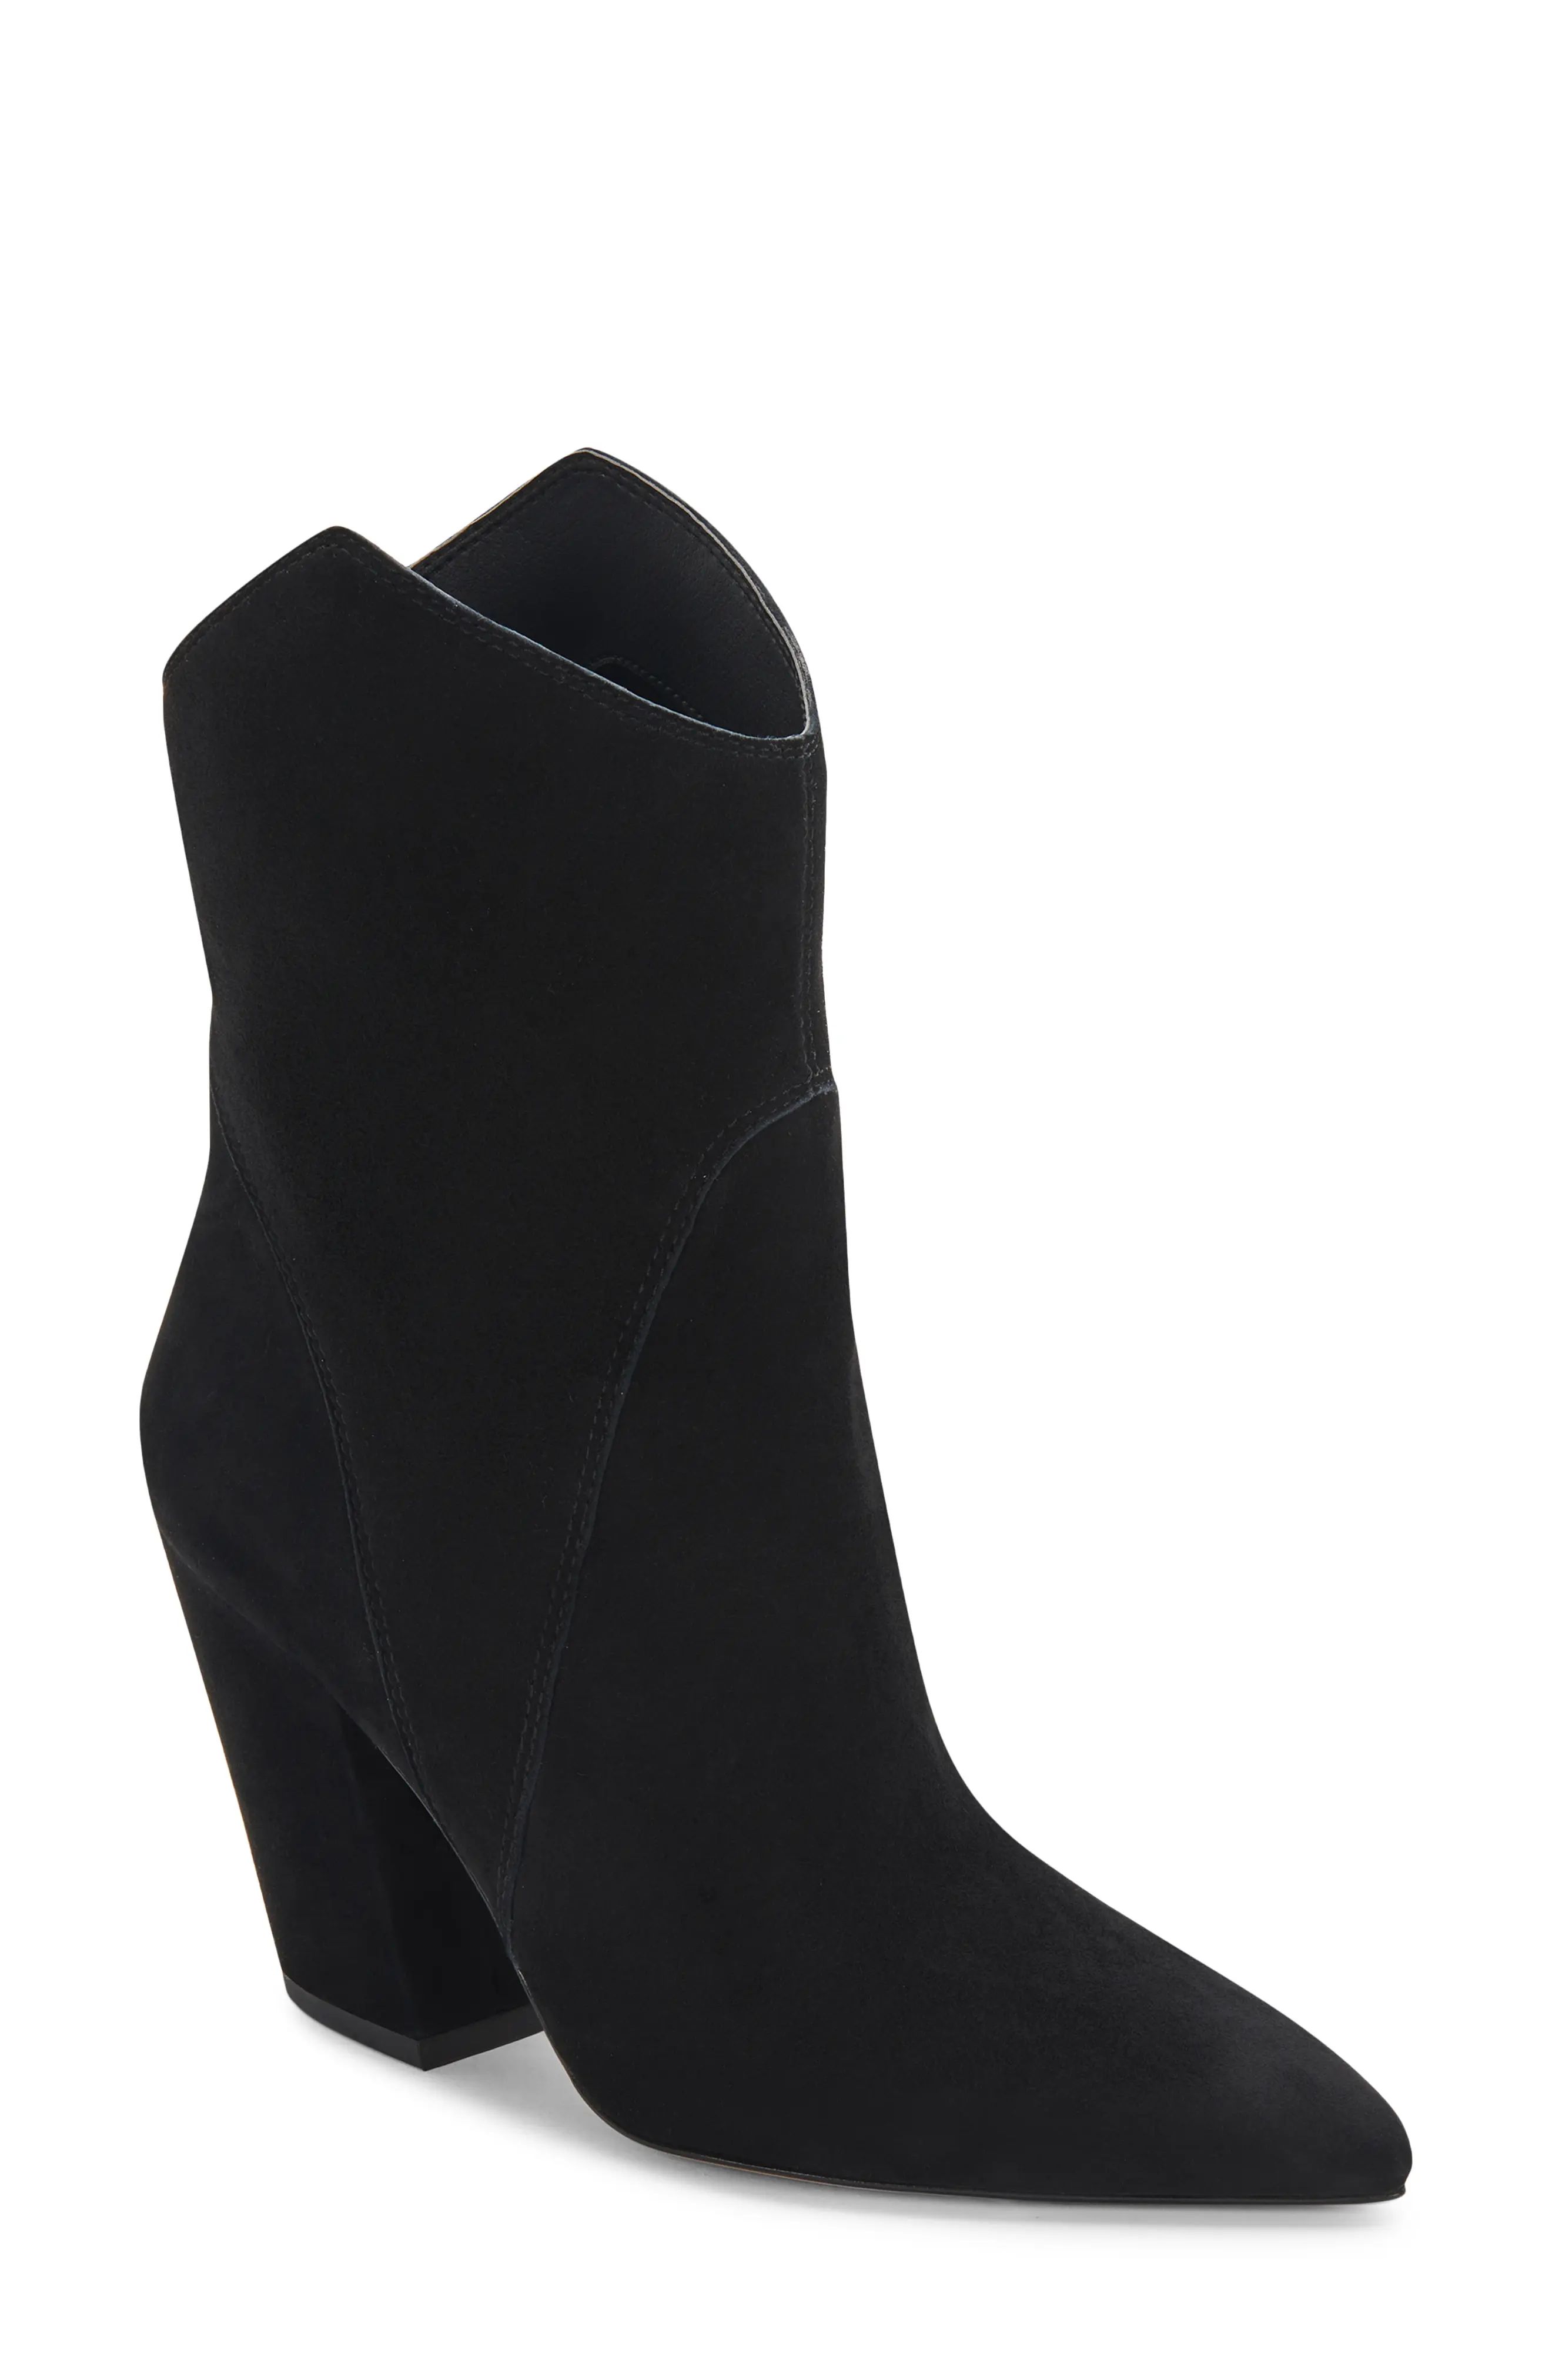 Dolce Vita Nestly Western Boot, Size 7 in Black Suede at Nordstrom | Nordstrom